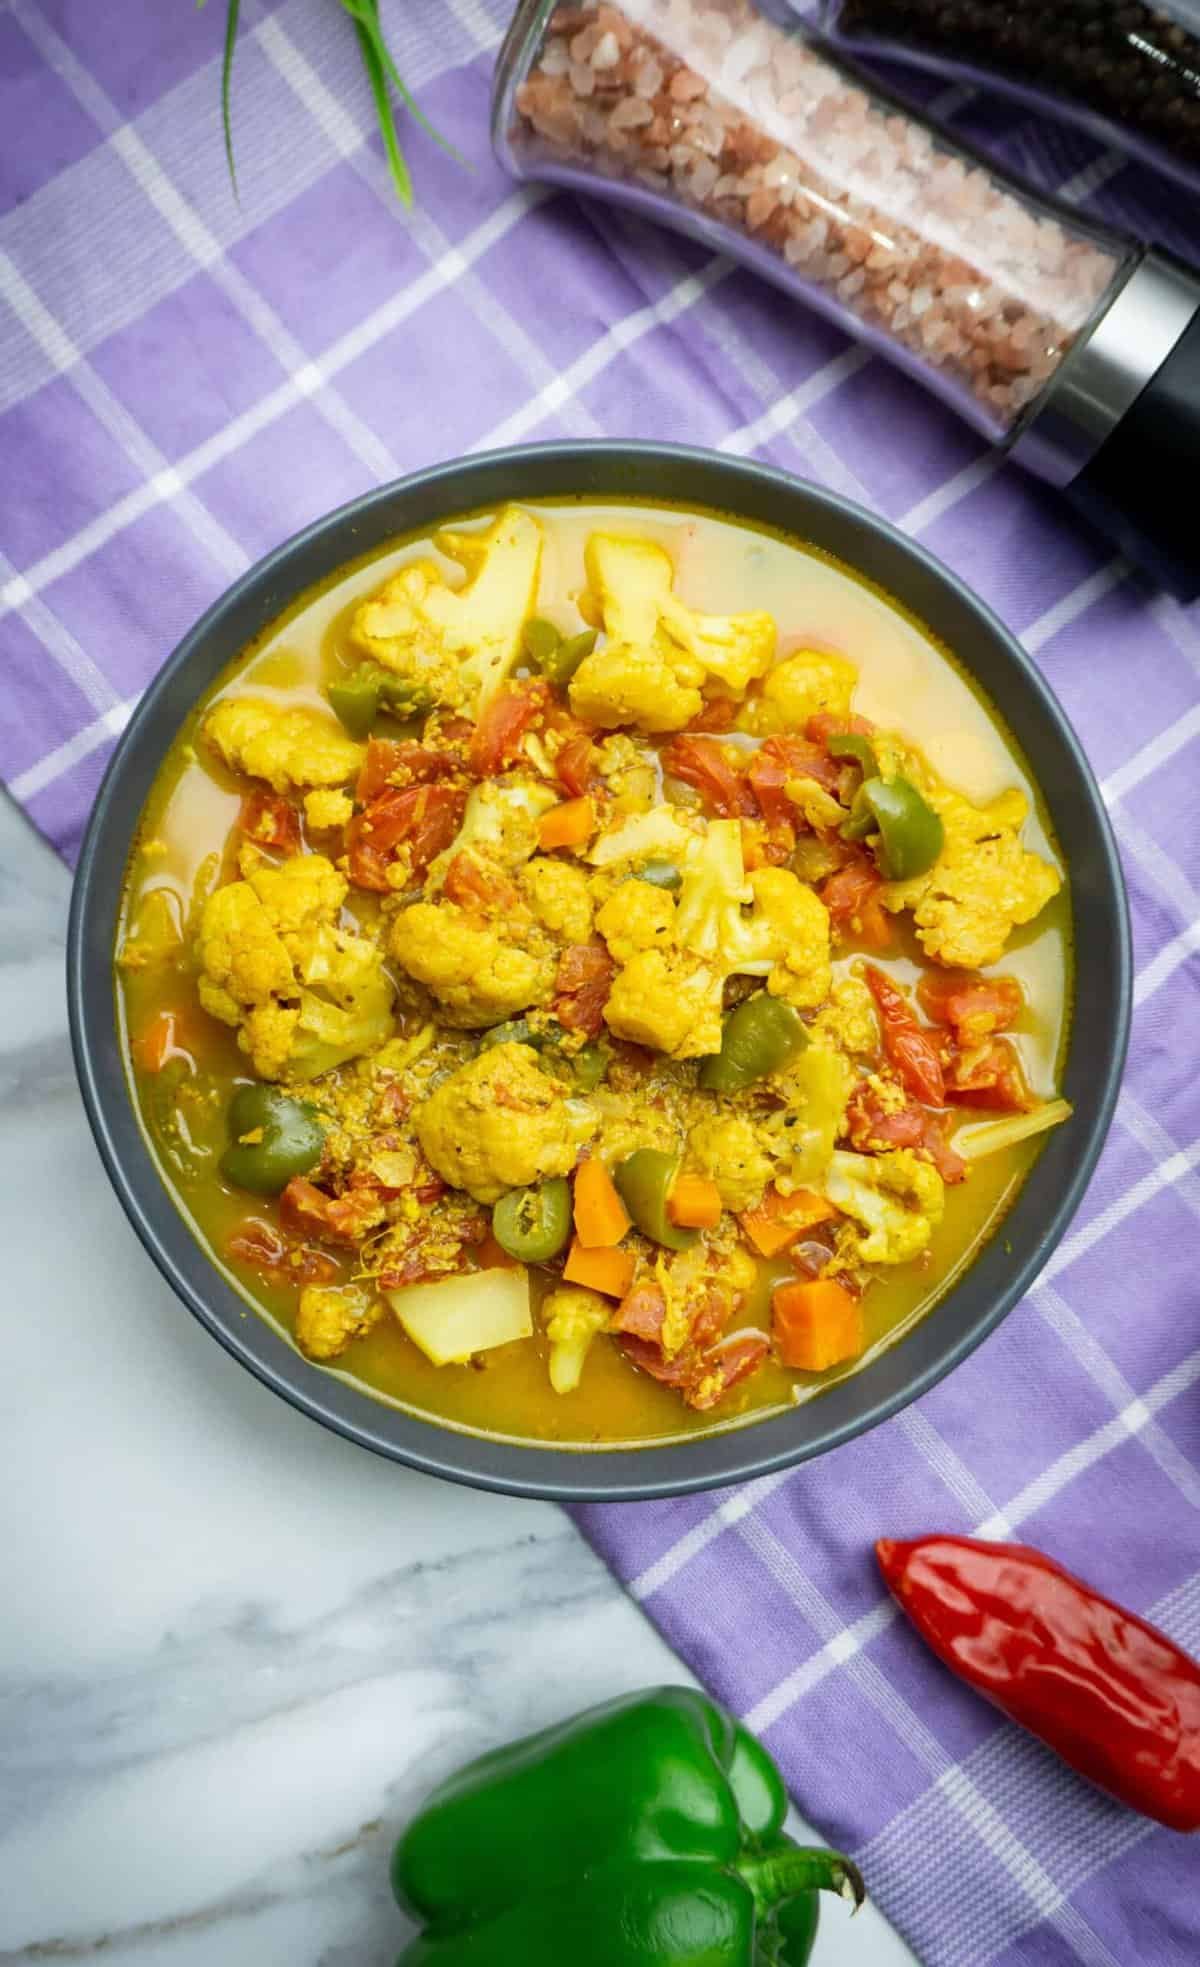 A mixed vegetable curry in a black bowl filled with cauliflower, peppers, chillies, carrots and onions in a yellow broth